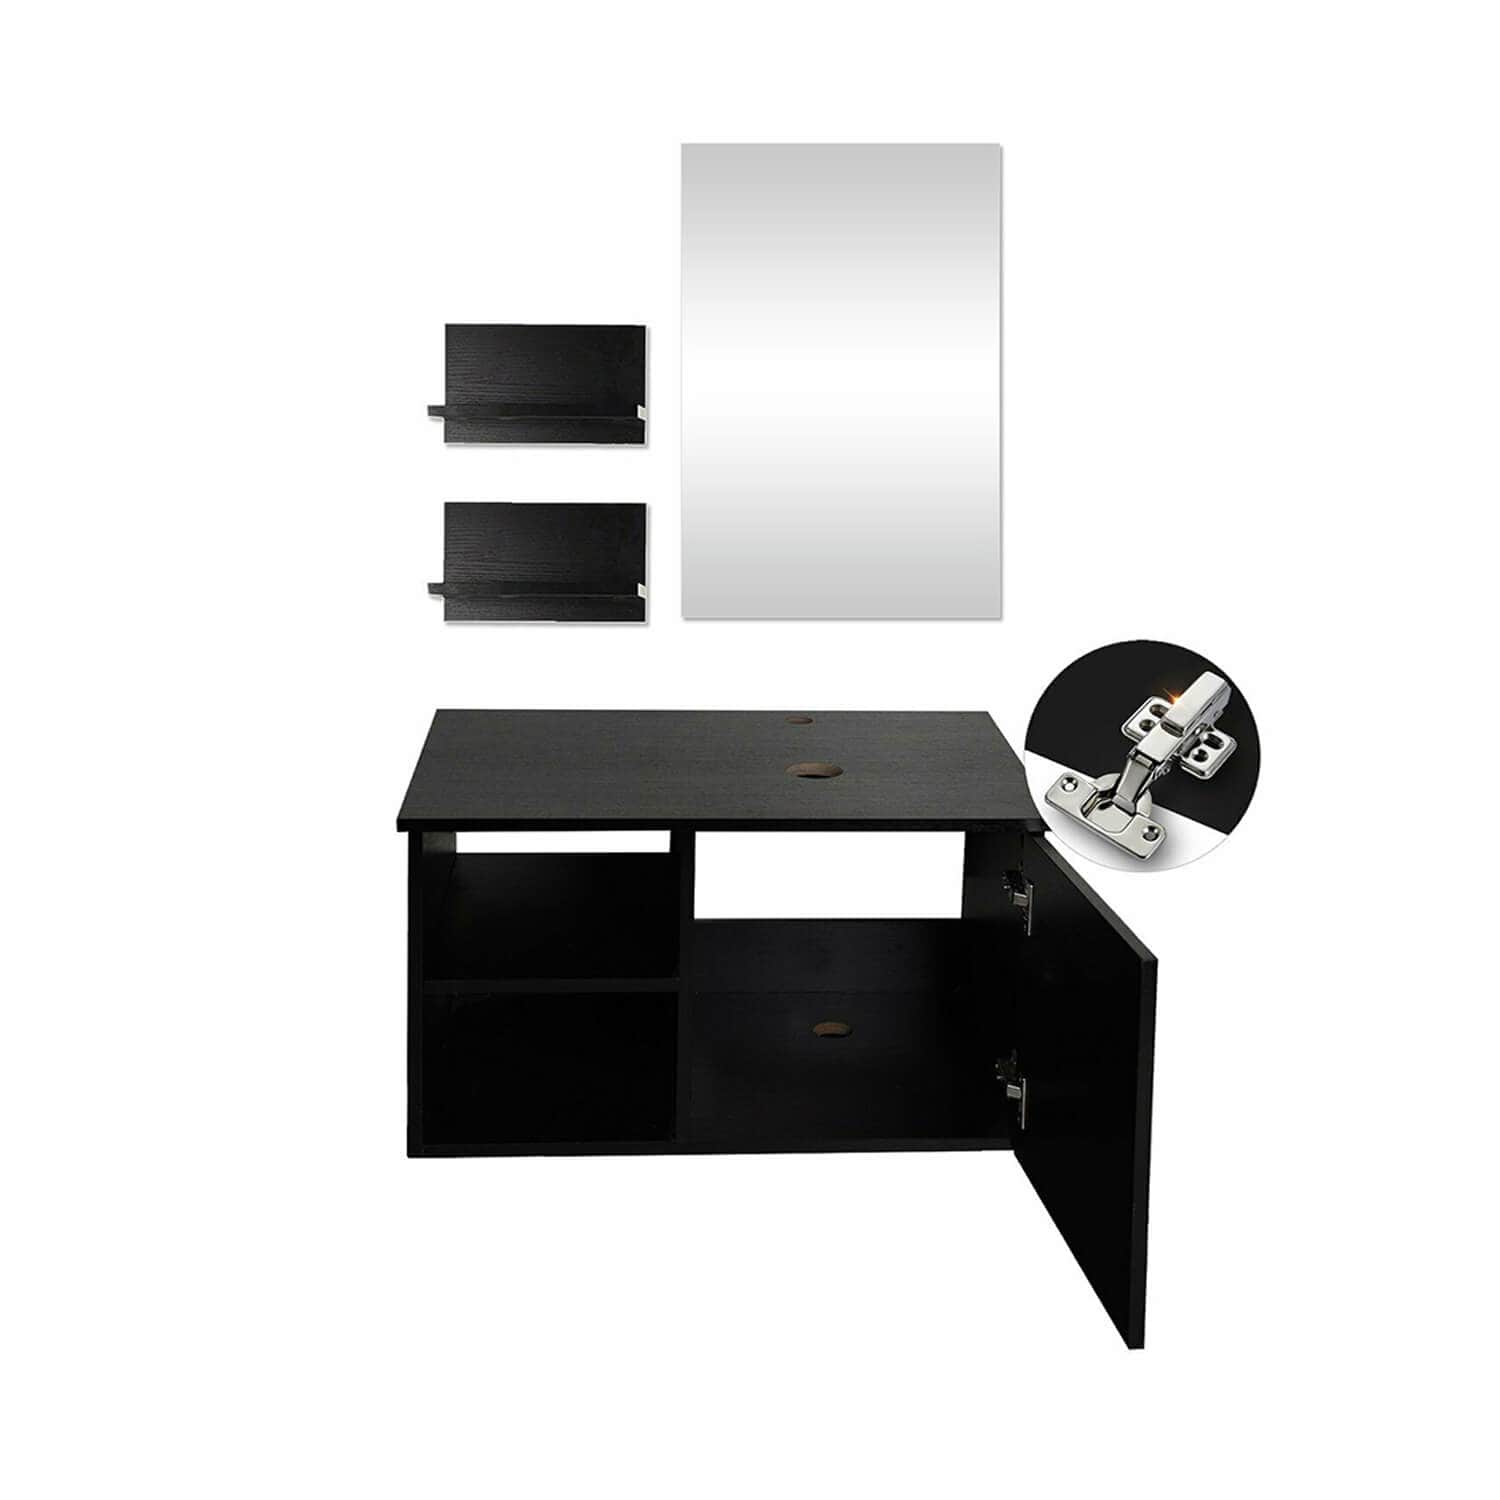 Details of Elecwish Chic 28" Black Bathroom Vanity Wall Mounted Cabinet with mirror BA20079